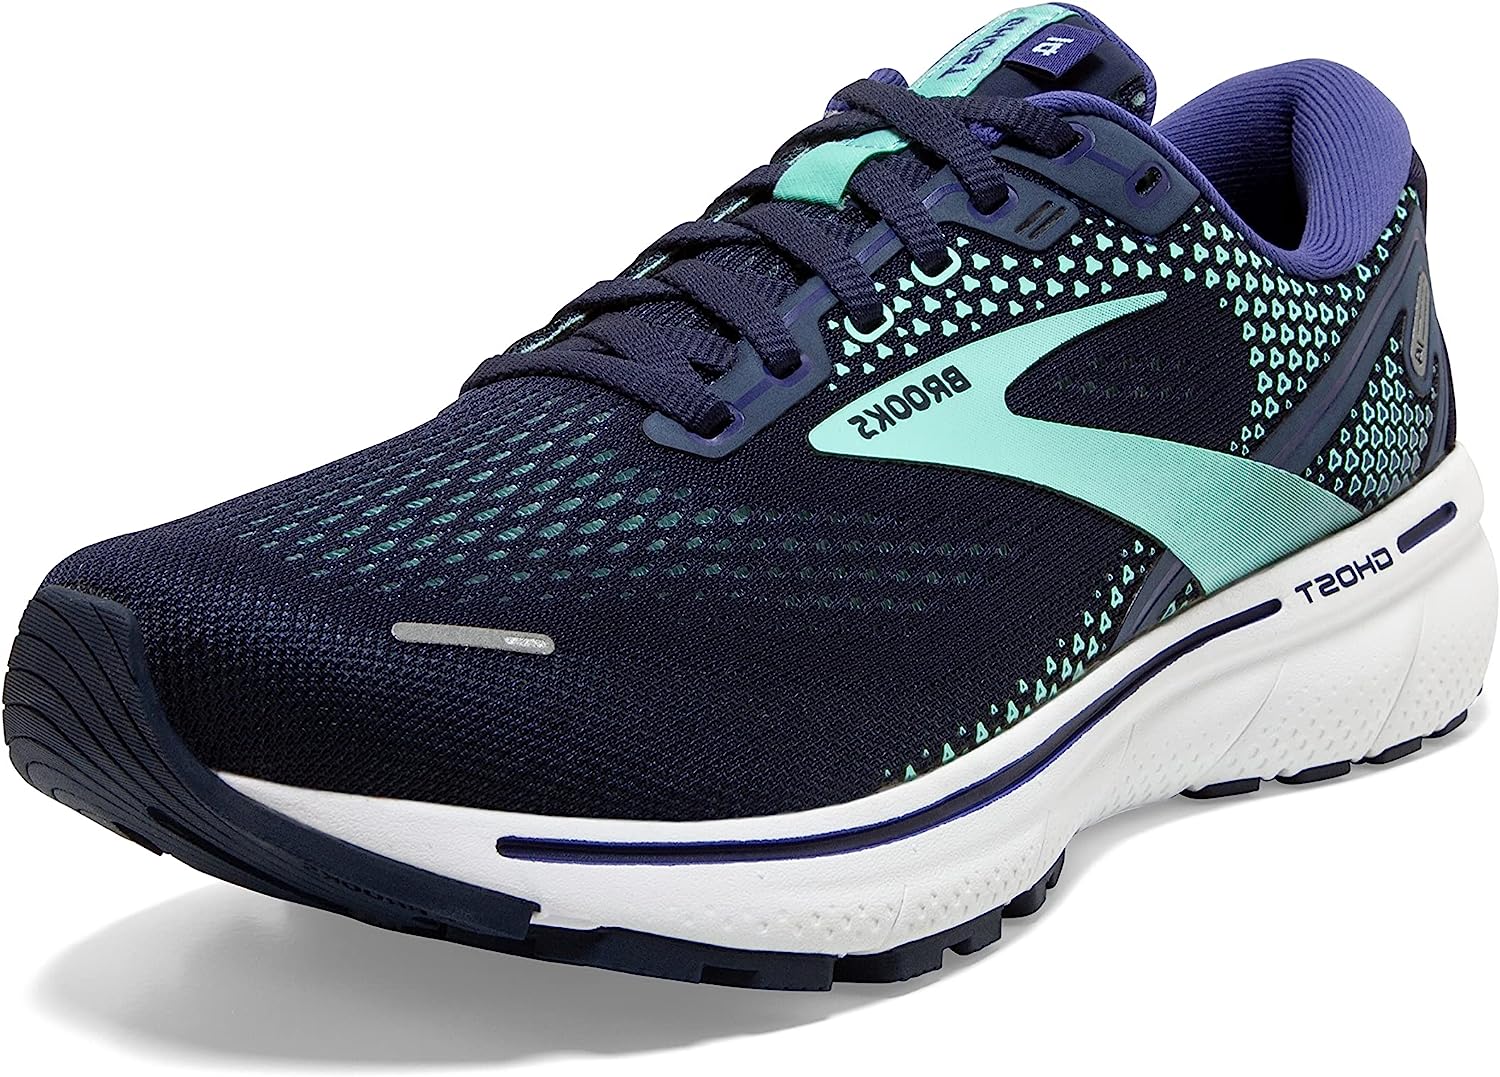 womens running shoes for beginners detailed review